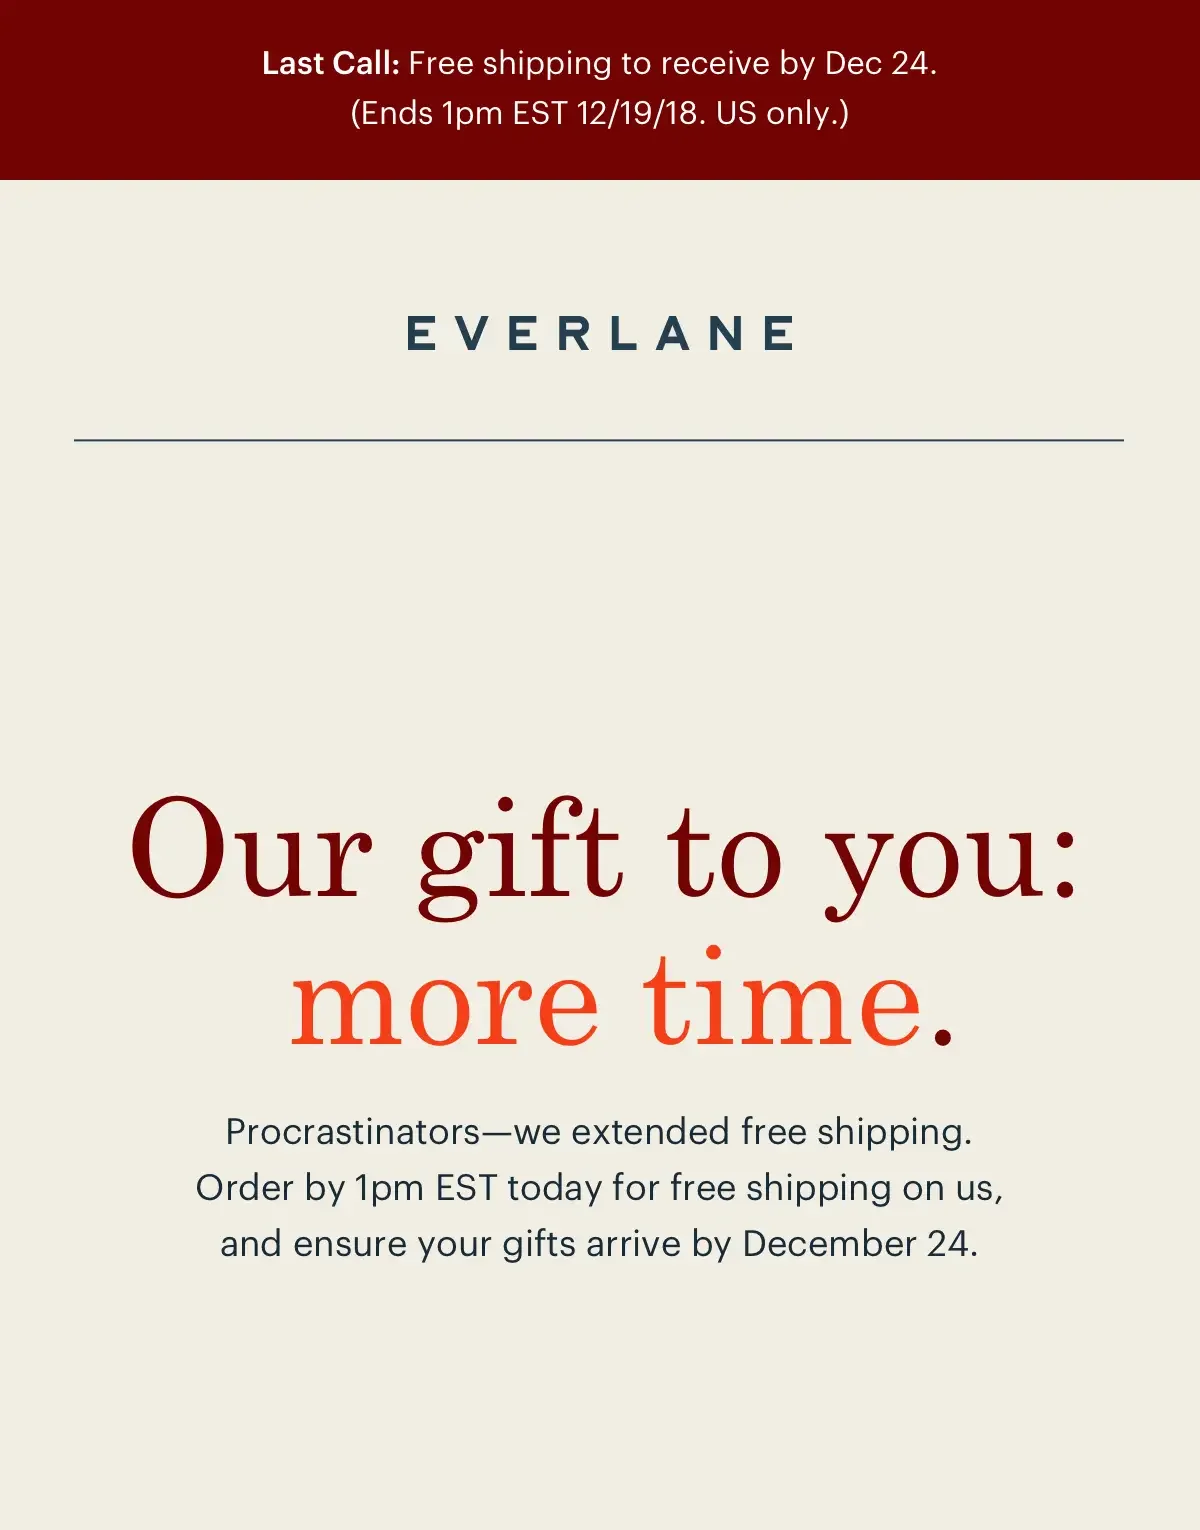 Our gift to you: more time. Procrastinators-we extended free shipping. Order by 1pm EST today for free shipping on us, and ensure your gifts arrive by December 24.